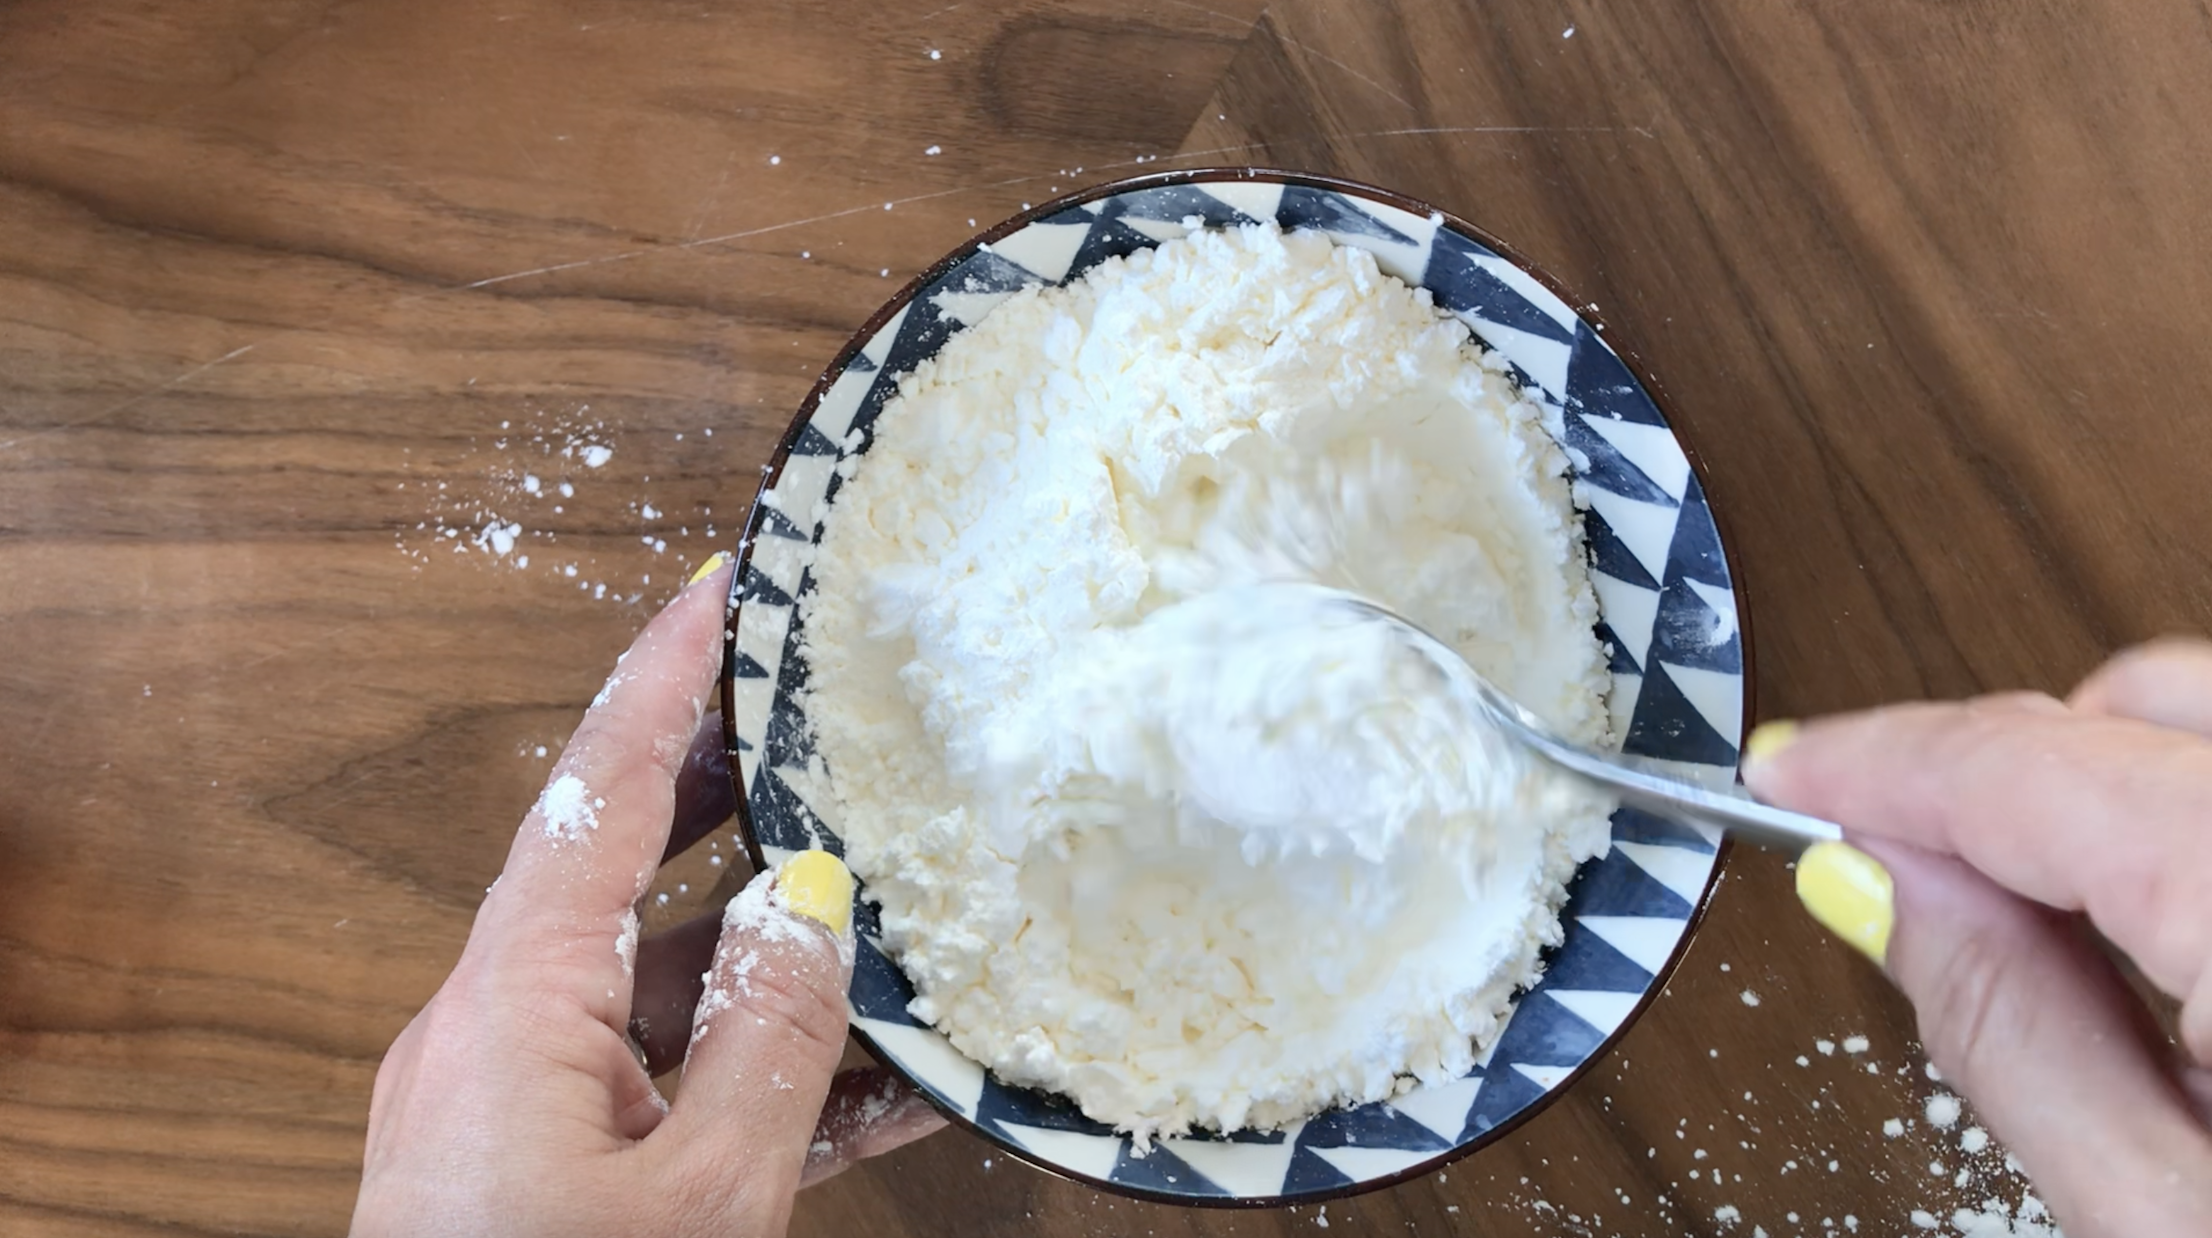 How to make fake snow with baking soda and cornstarch step 2